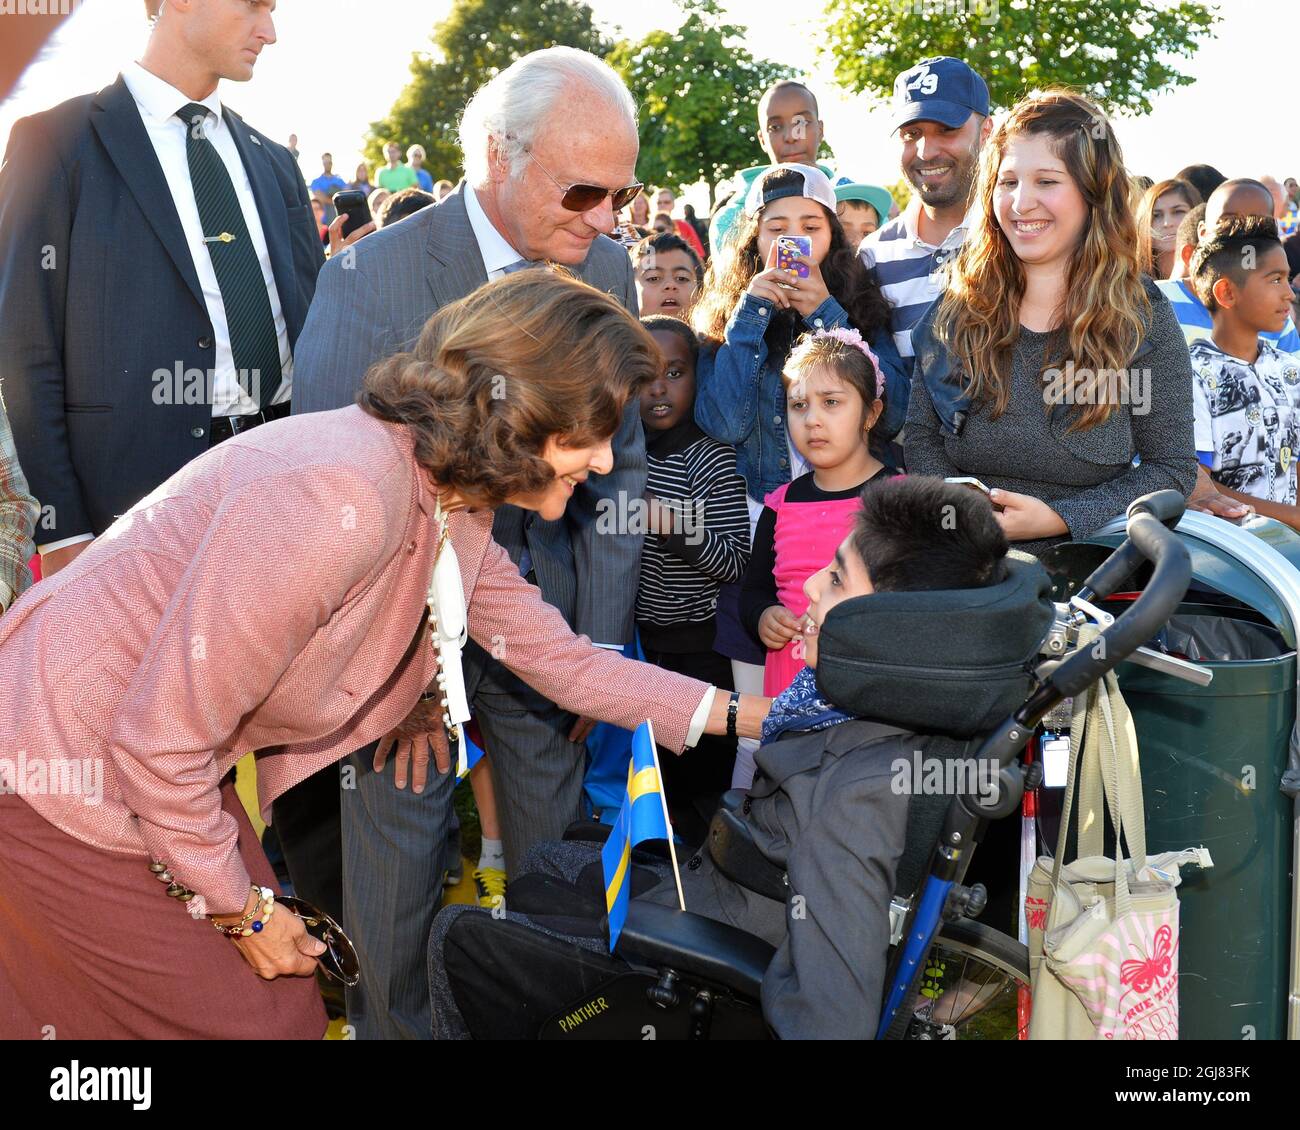 LINKOPING 20130903 King Carl Gustaf and Queen Silvia meet children during a visit to Ryd's activity park in Linkoping, Sweden, September 3, 2013. The visit is a part of the Kings ongoing 40 year anniversary on the throne. Foto:Jonas Ekstromer / SCANPIX / Kod 10030  Stock Photo